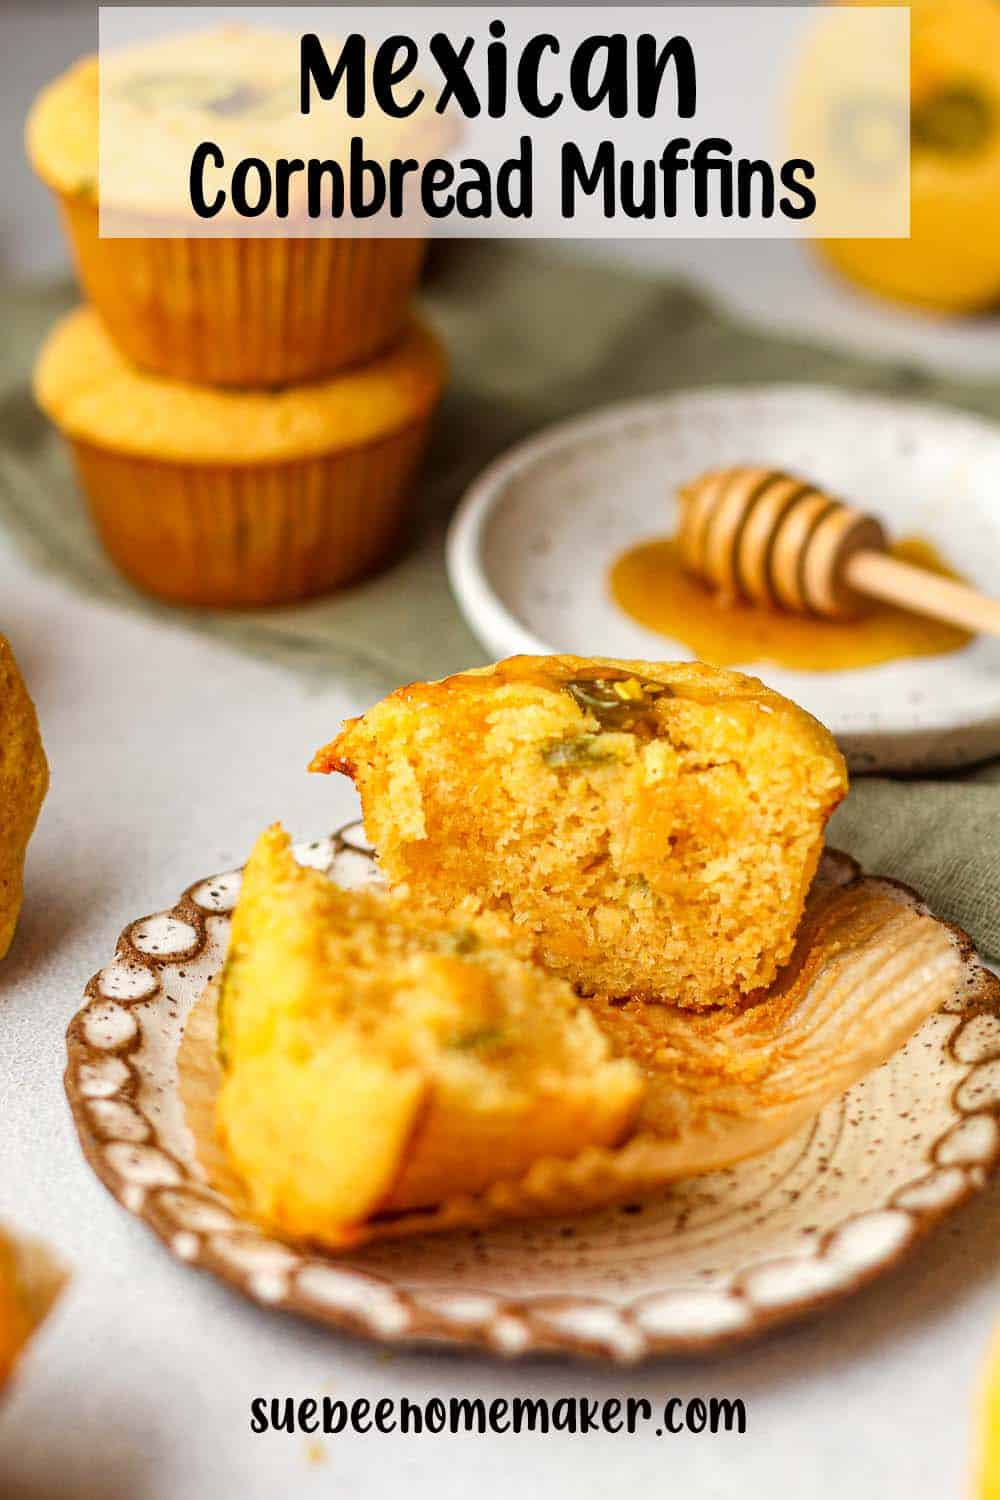 Side view of a small plate of a halved cornbread muffin with cheese and jalapeno.